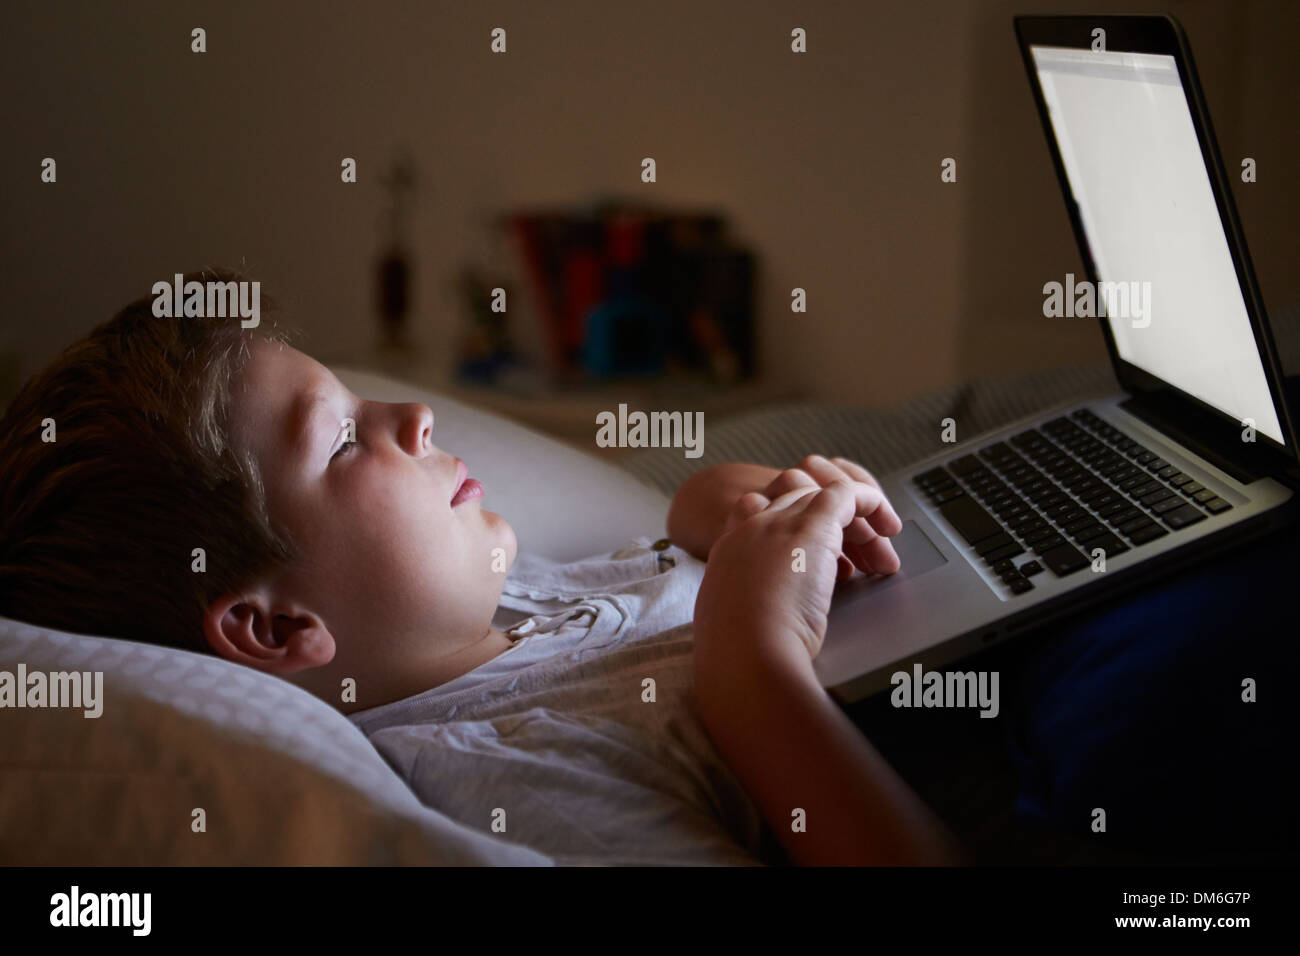 Boy Using Laptop In Bed At Night Stock Photo